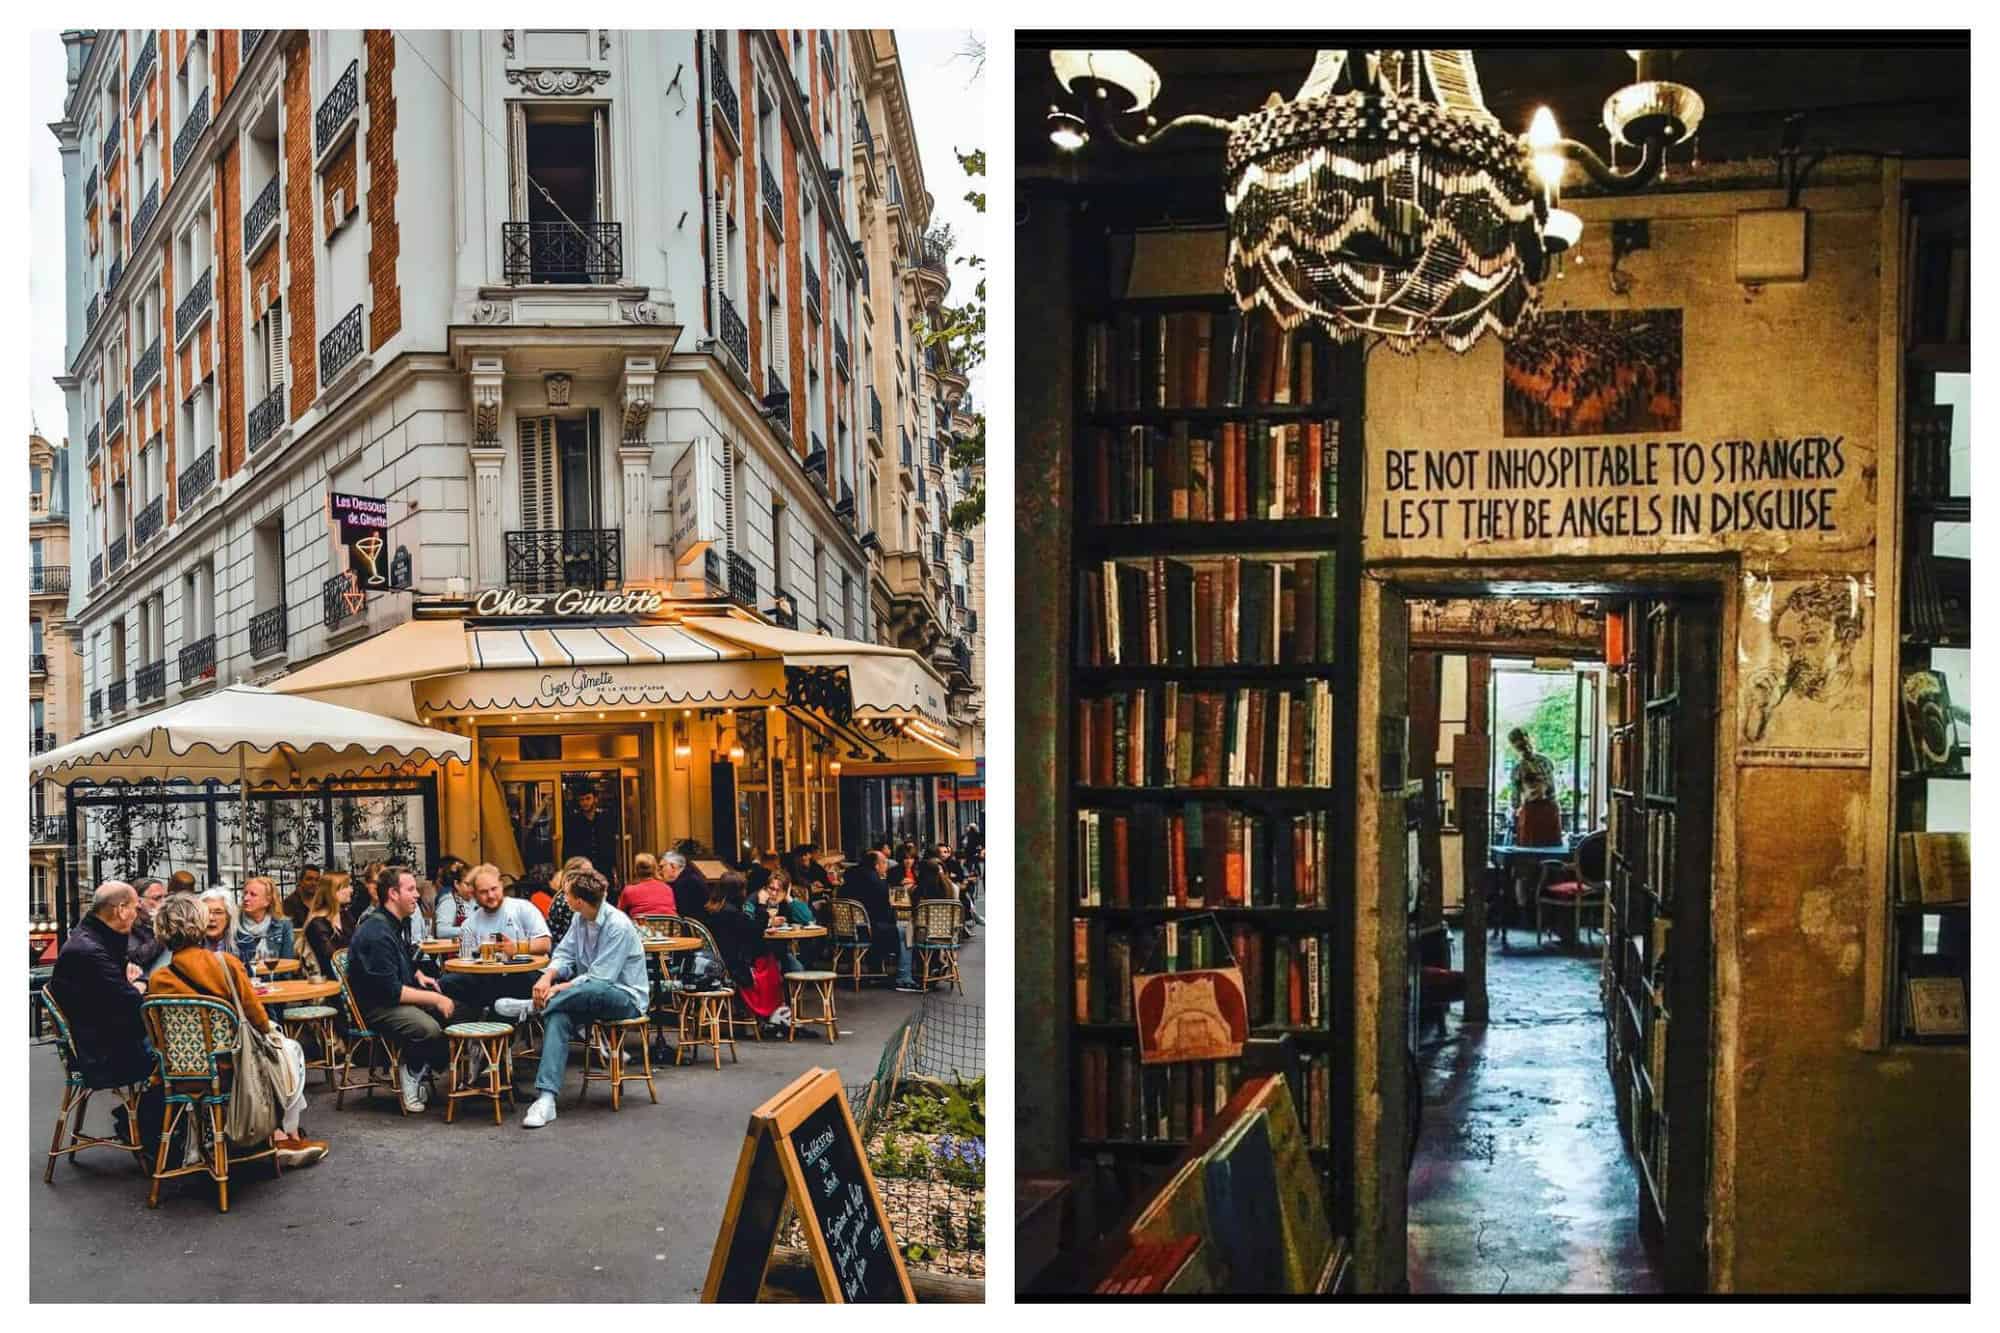 Left: Parisians enjoy happy hour at a bistrot with beige parasols. Right: A rustic bookstore with beige walls and a black chandelier.